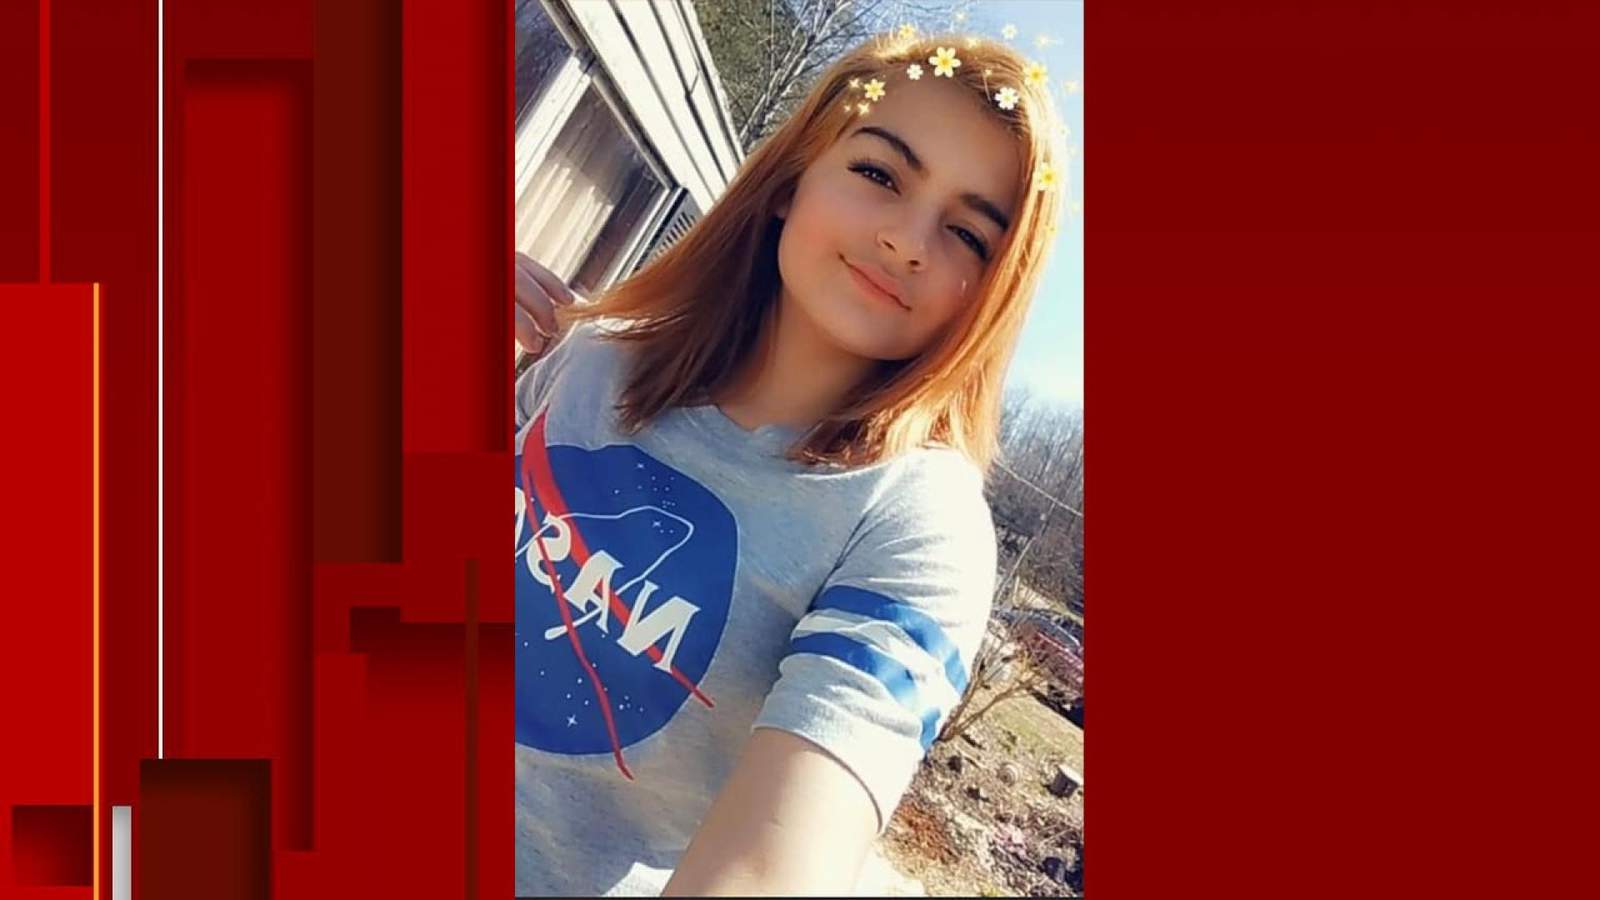 Authorities searching for missing 14-year-old Henry County girl